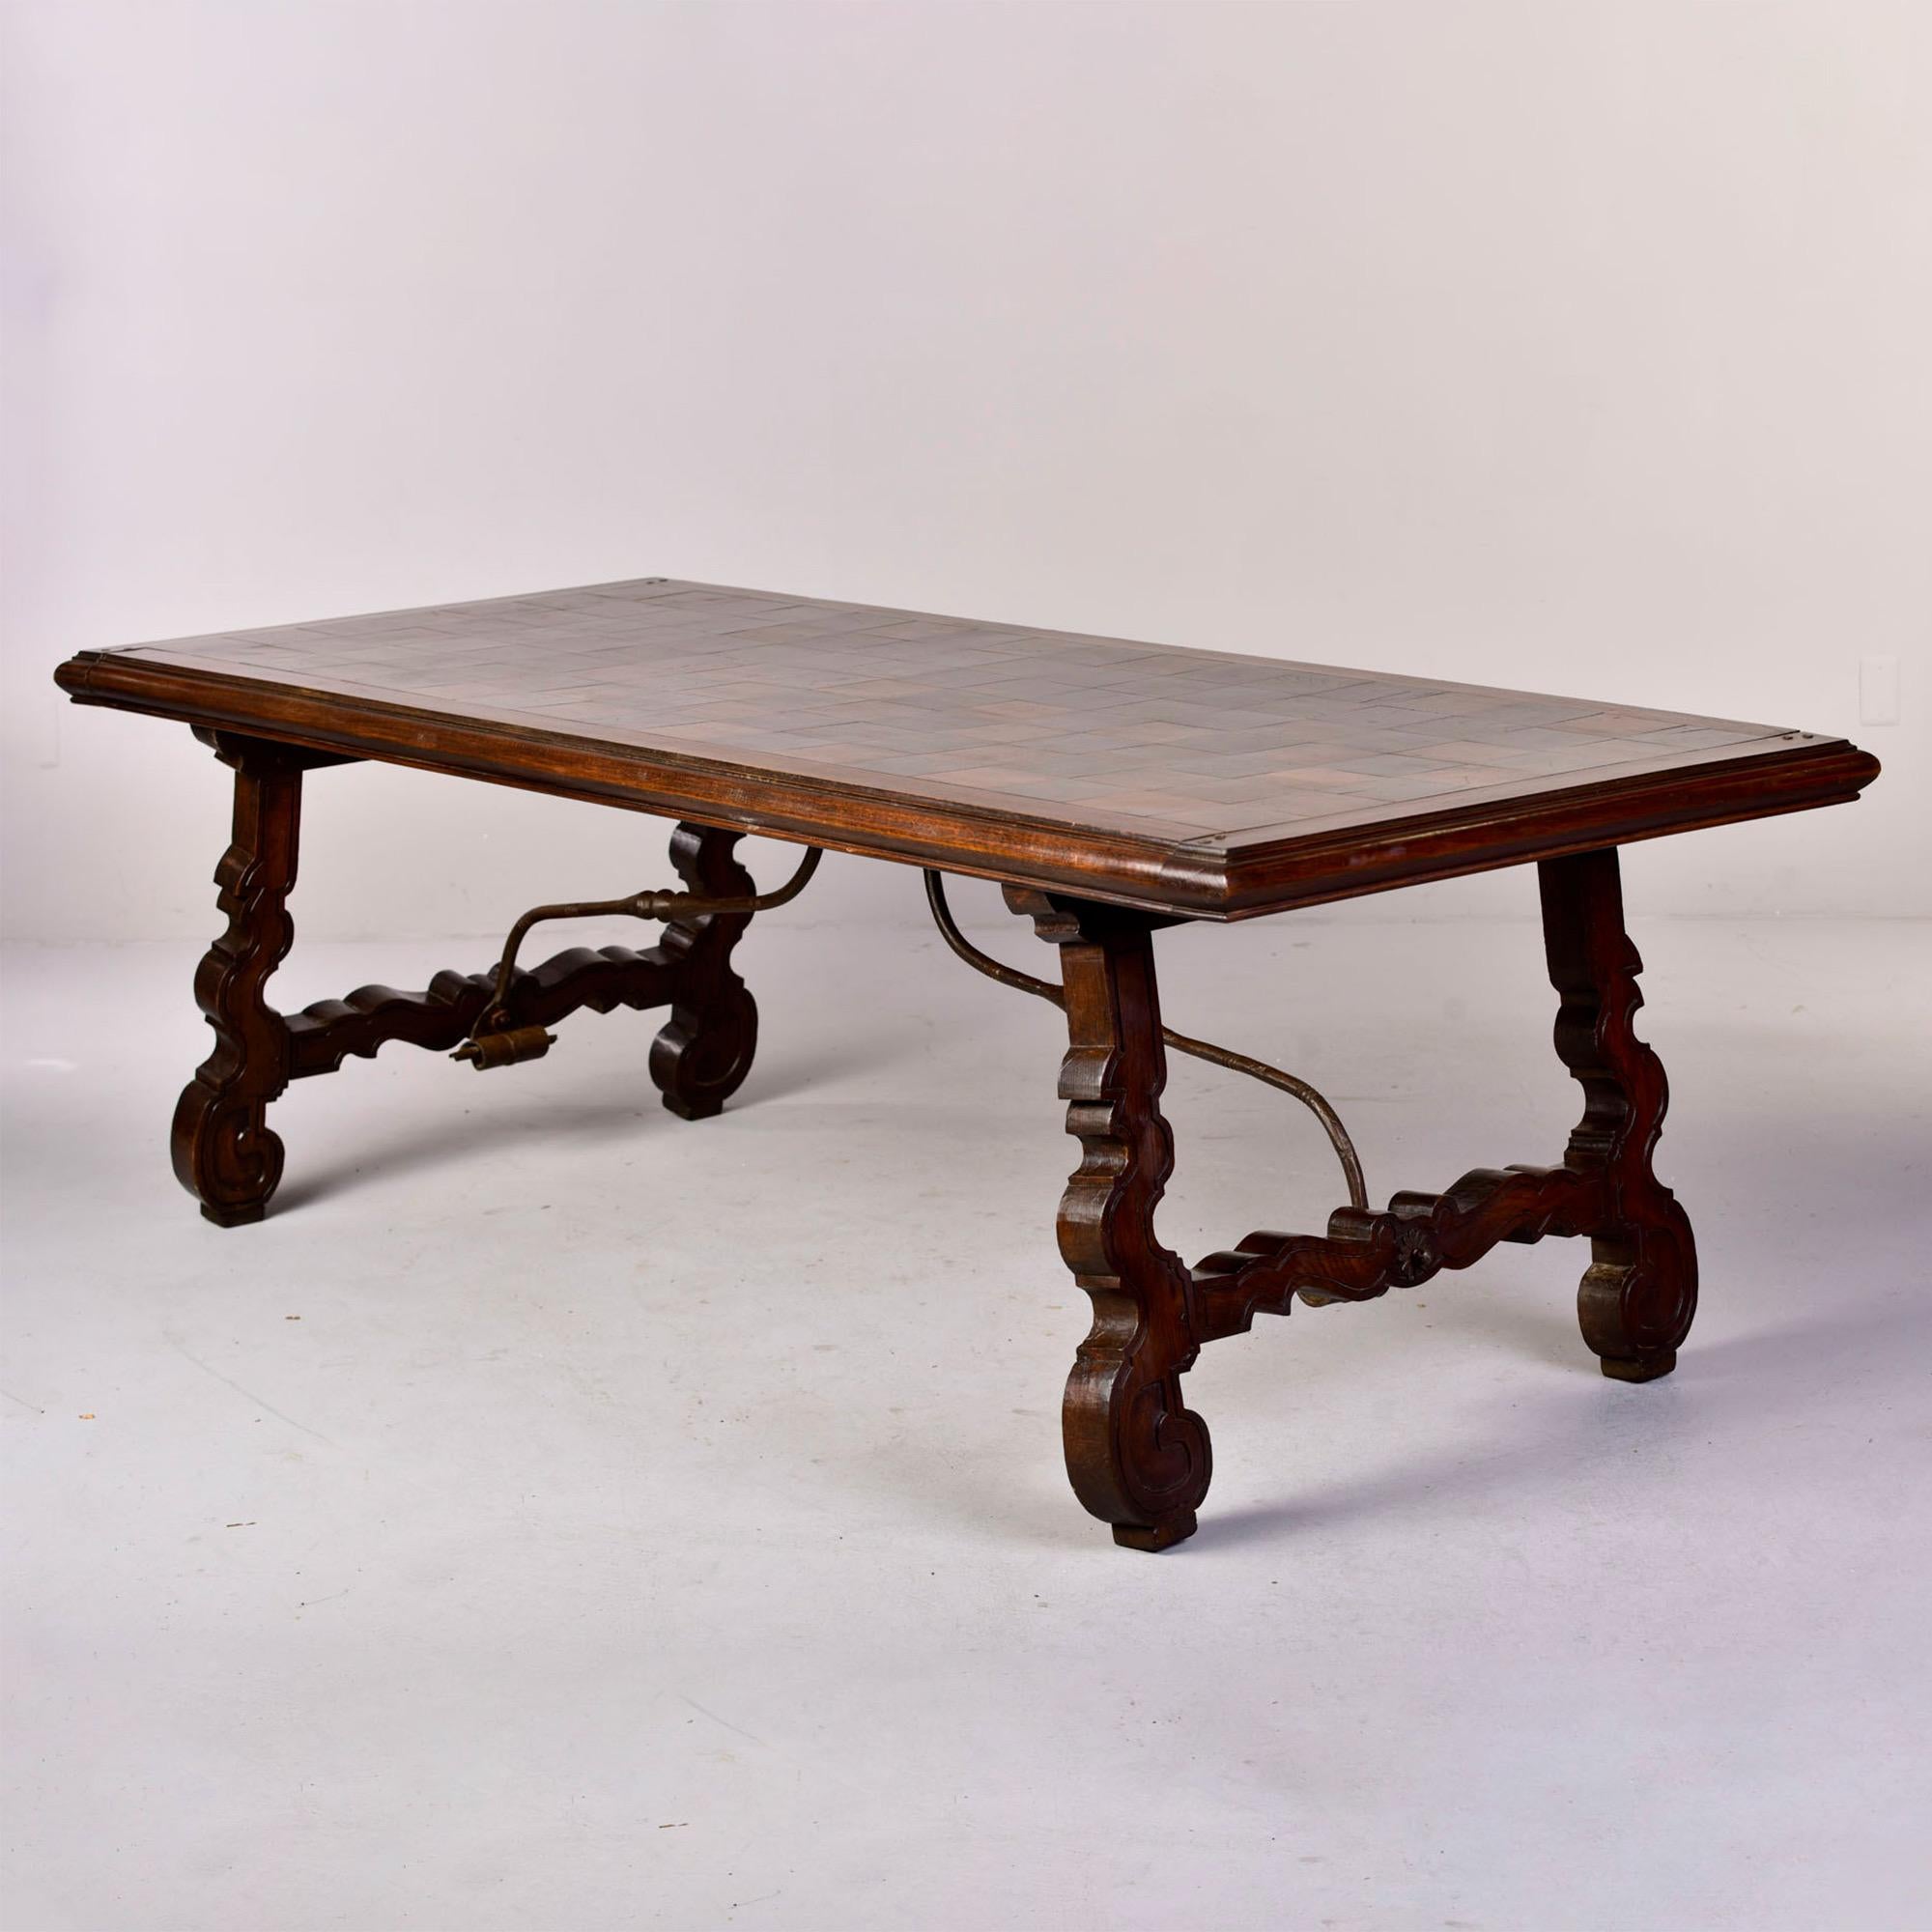 Circa 1840s large Spanish walnut table features marquetry work on the top, carved legs and an iron stretcher. Unknown maker. 

Apron height: 27.5”.